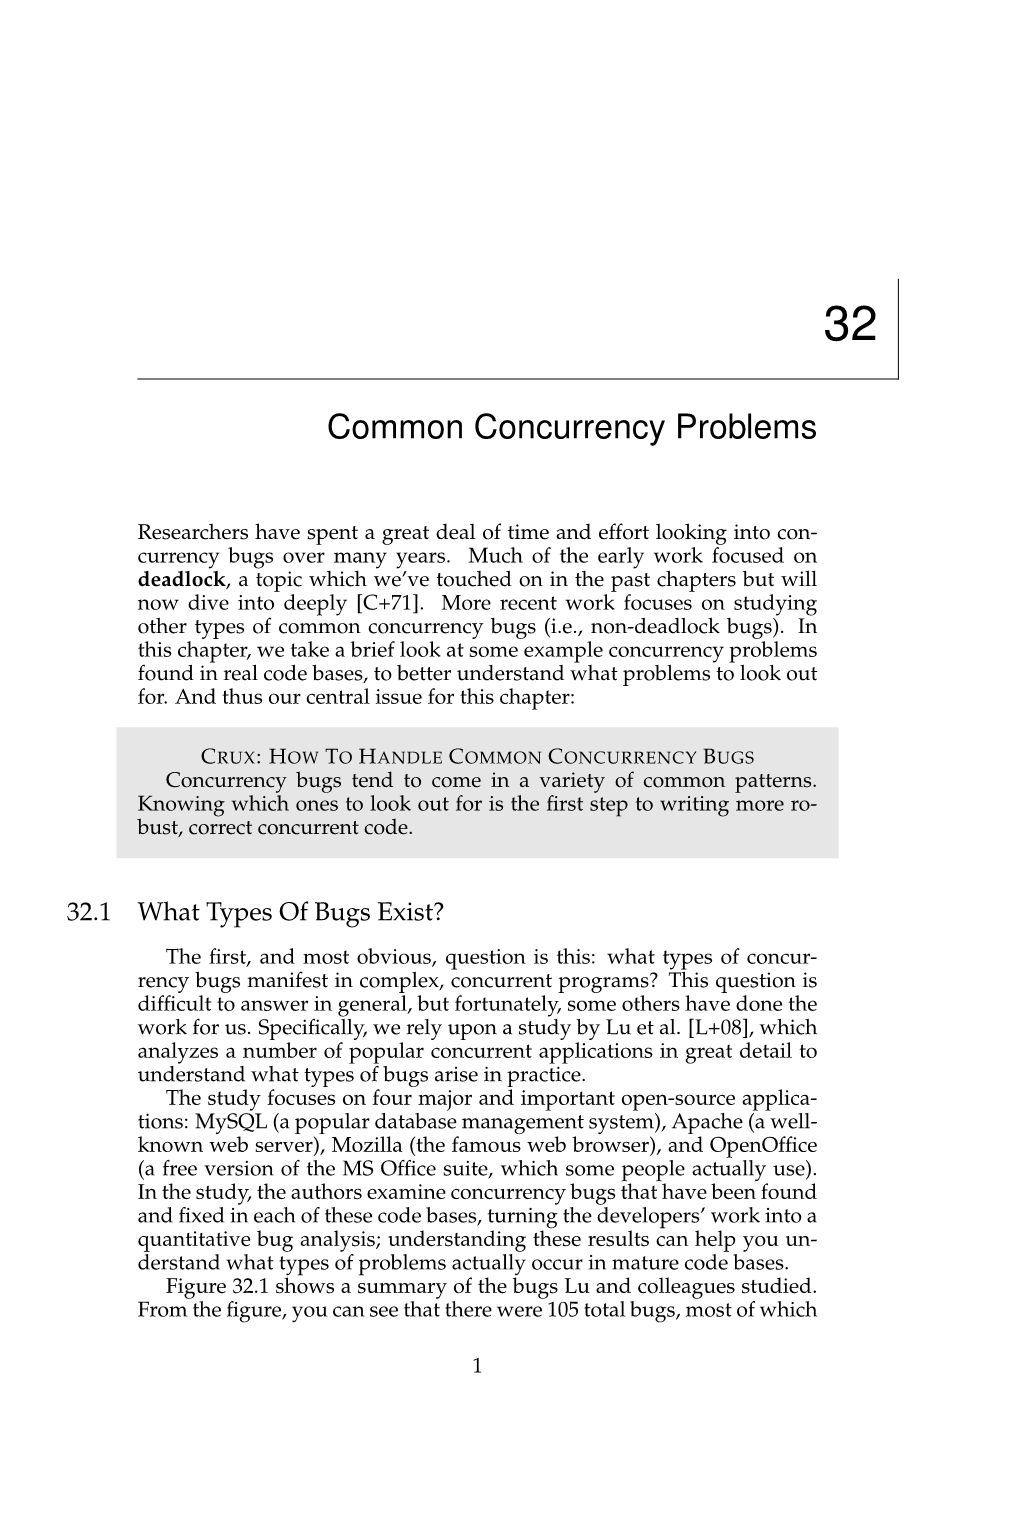 Common Concurrency Problems